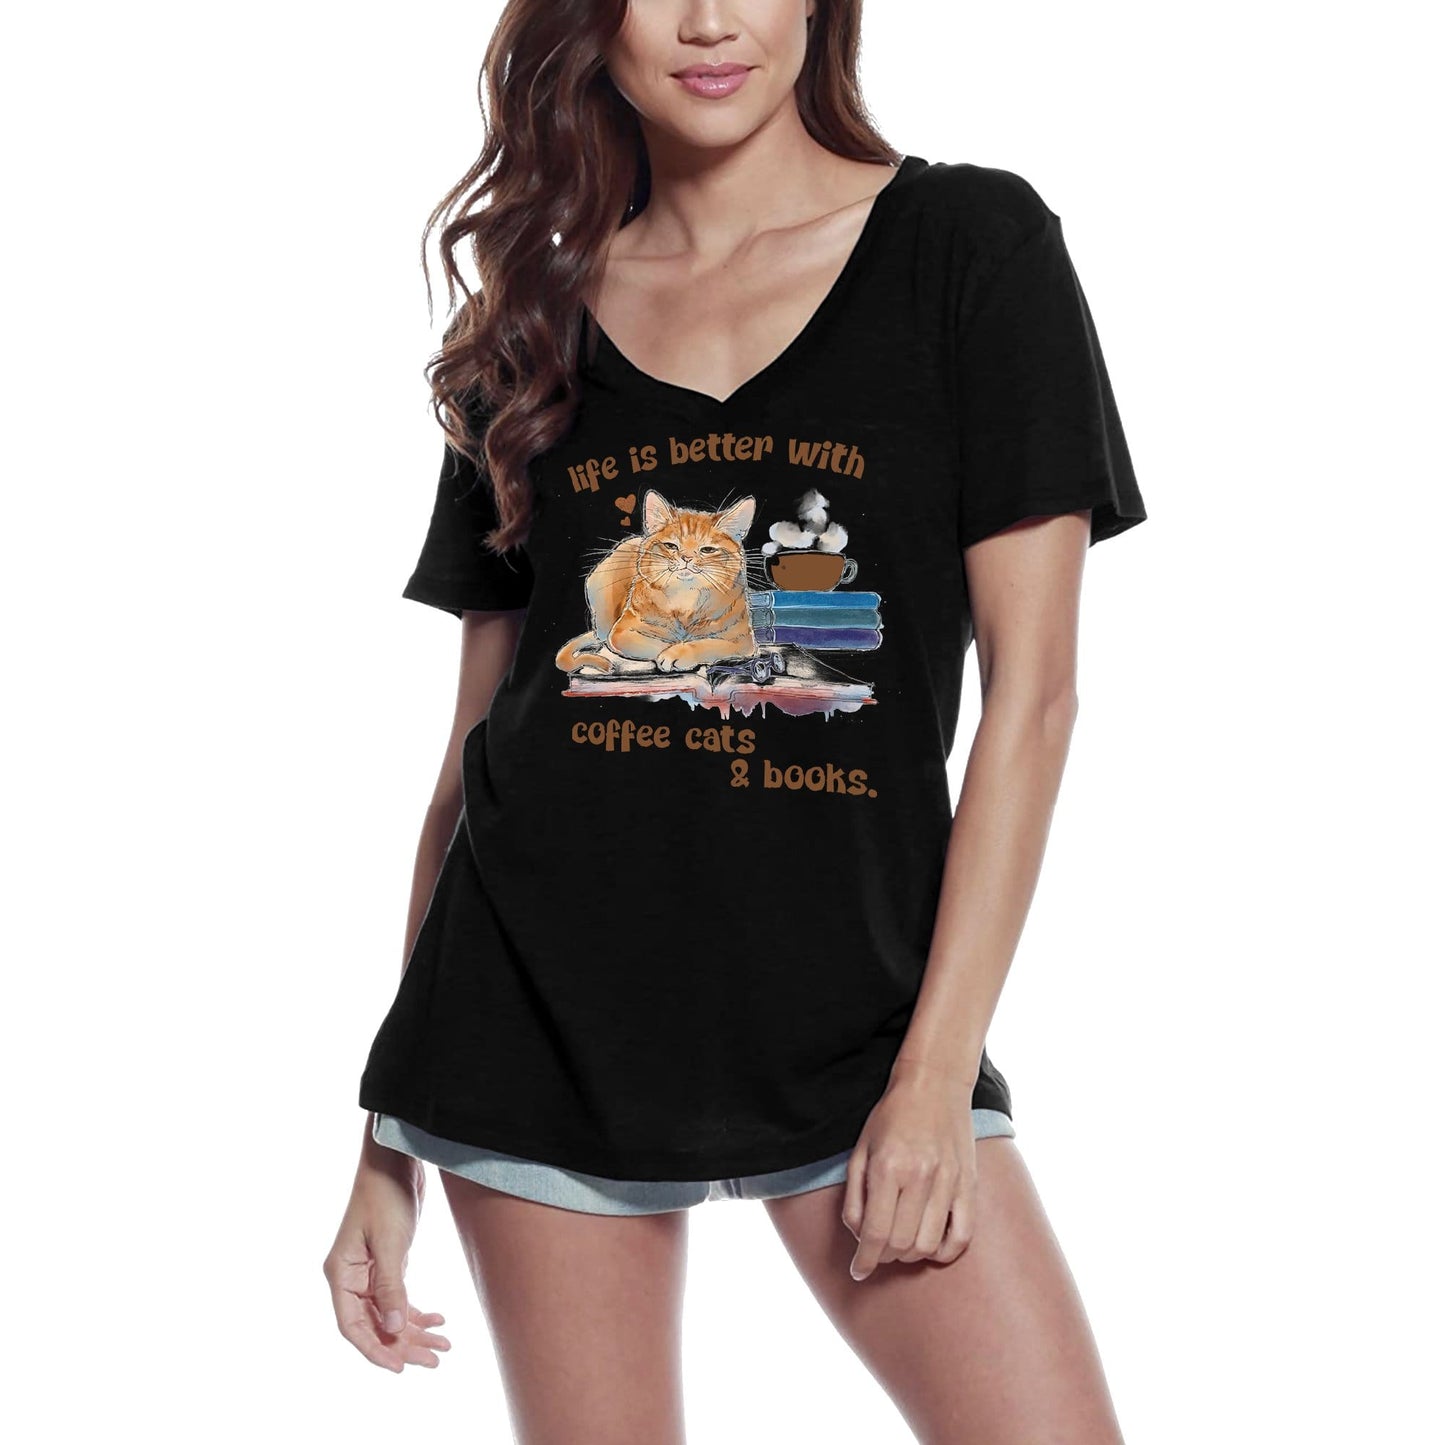 ULTRABASIC Women's T-Shirt Life's Better With Coffee Cats and Books - Cute Short Sleeve Tee Shirt